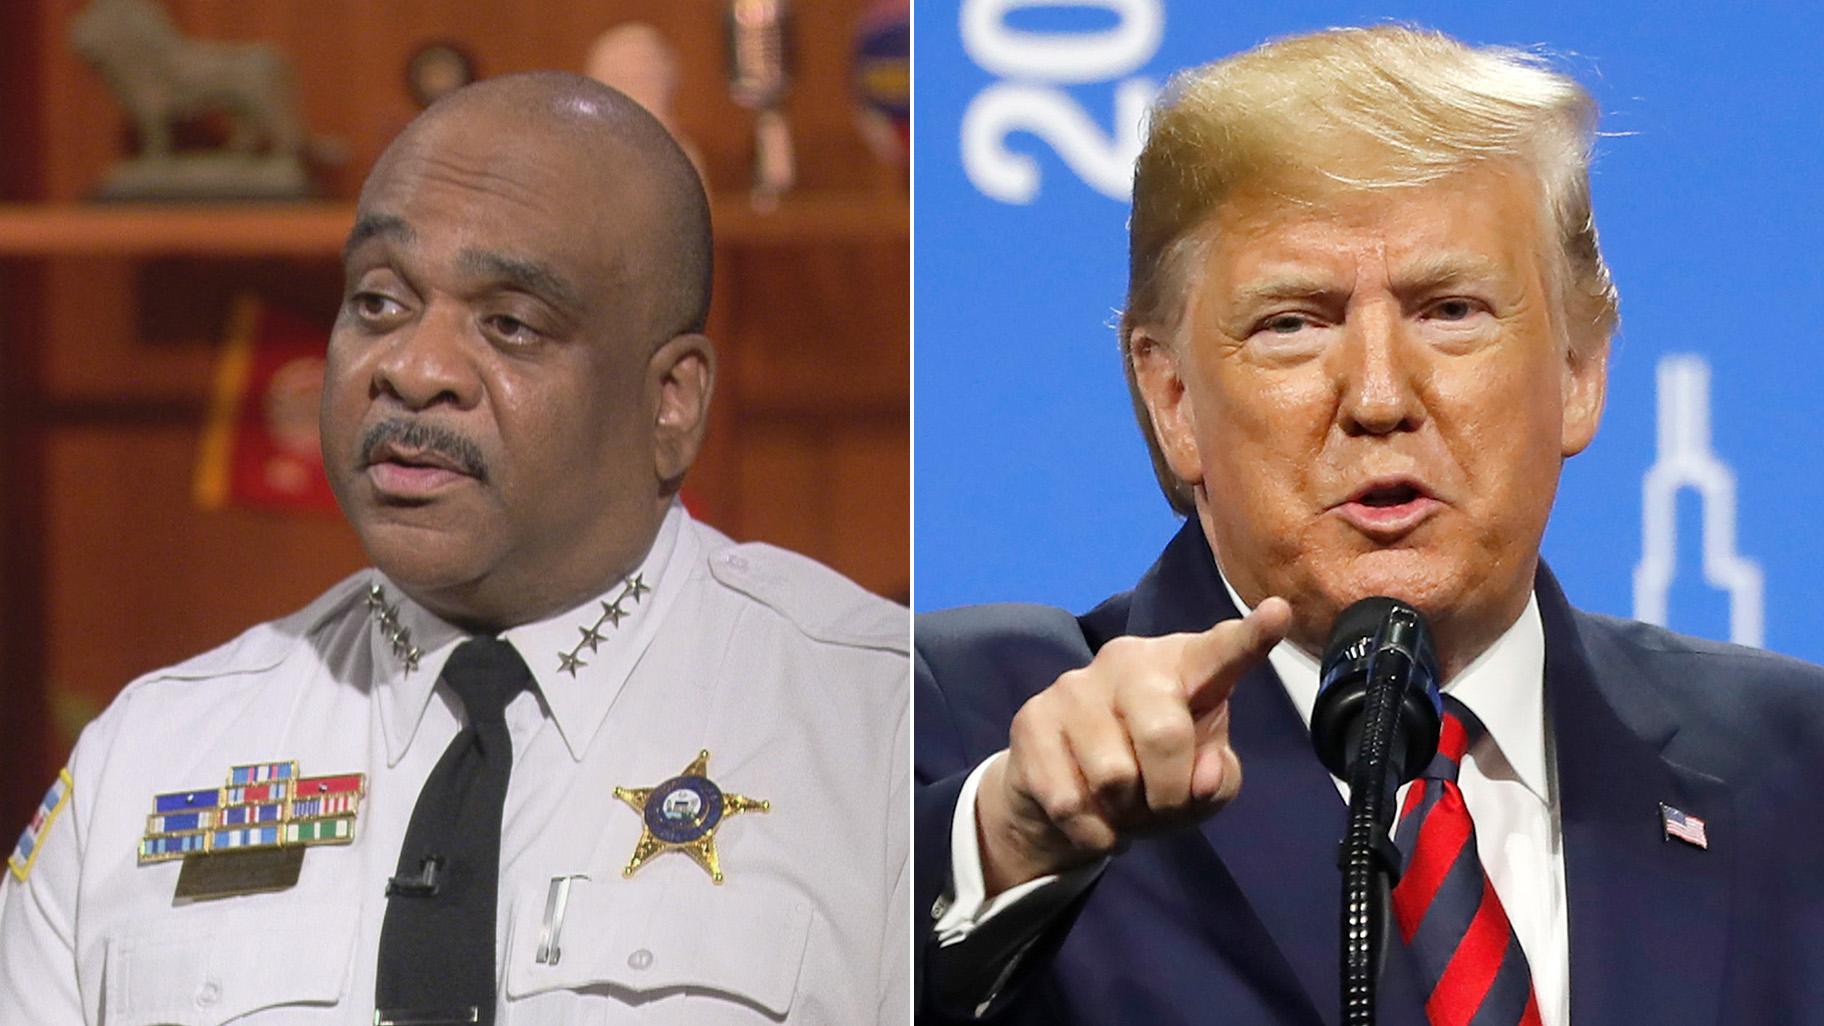 Chicago Police Superintendent Eddie Johnson on “Chicago Tonight” in 2018, left, and President Donald Trump in Chicago on Oct. 28, 2019. (WTTW News, left, AP Photo / Charles Rex Arbogast, right)